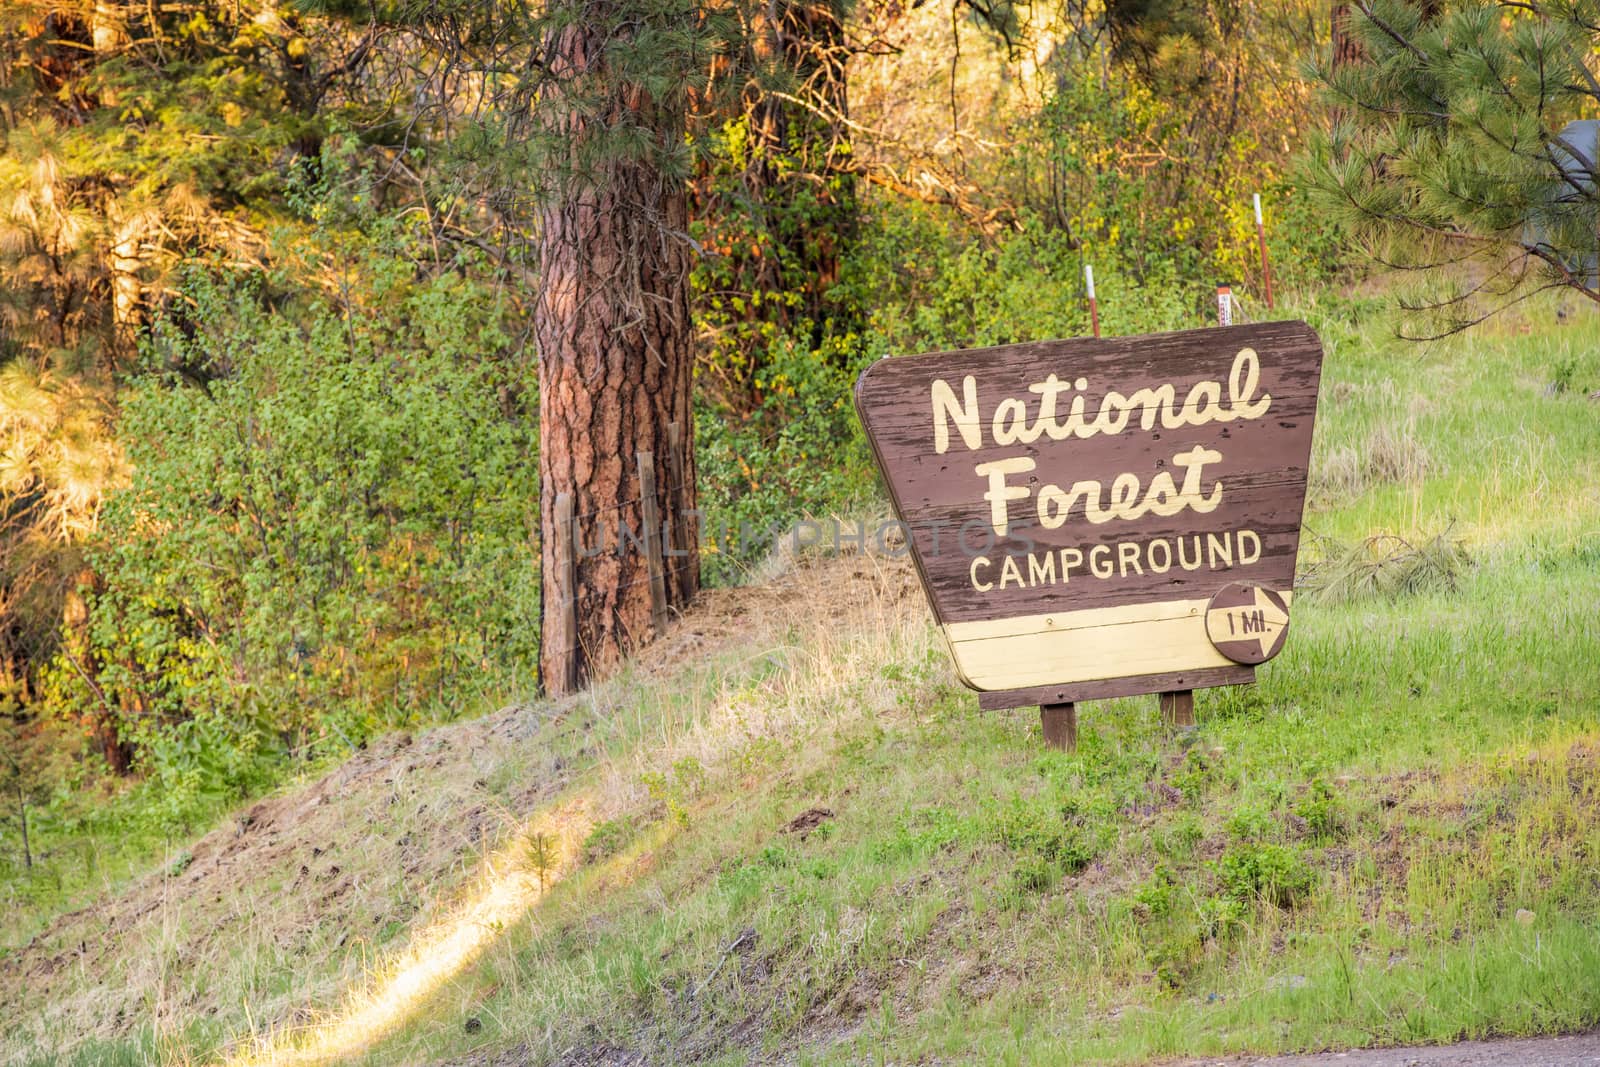 Nation forest sign showing you where to camp